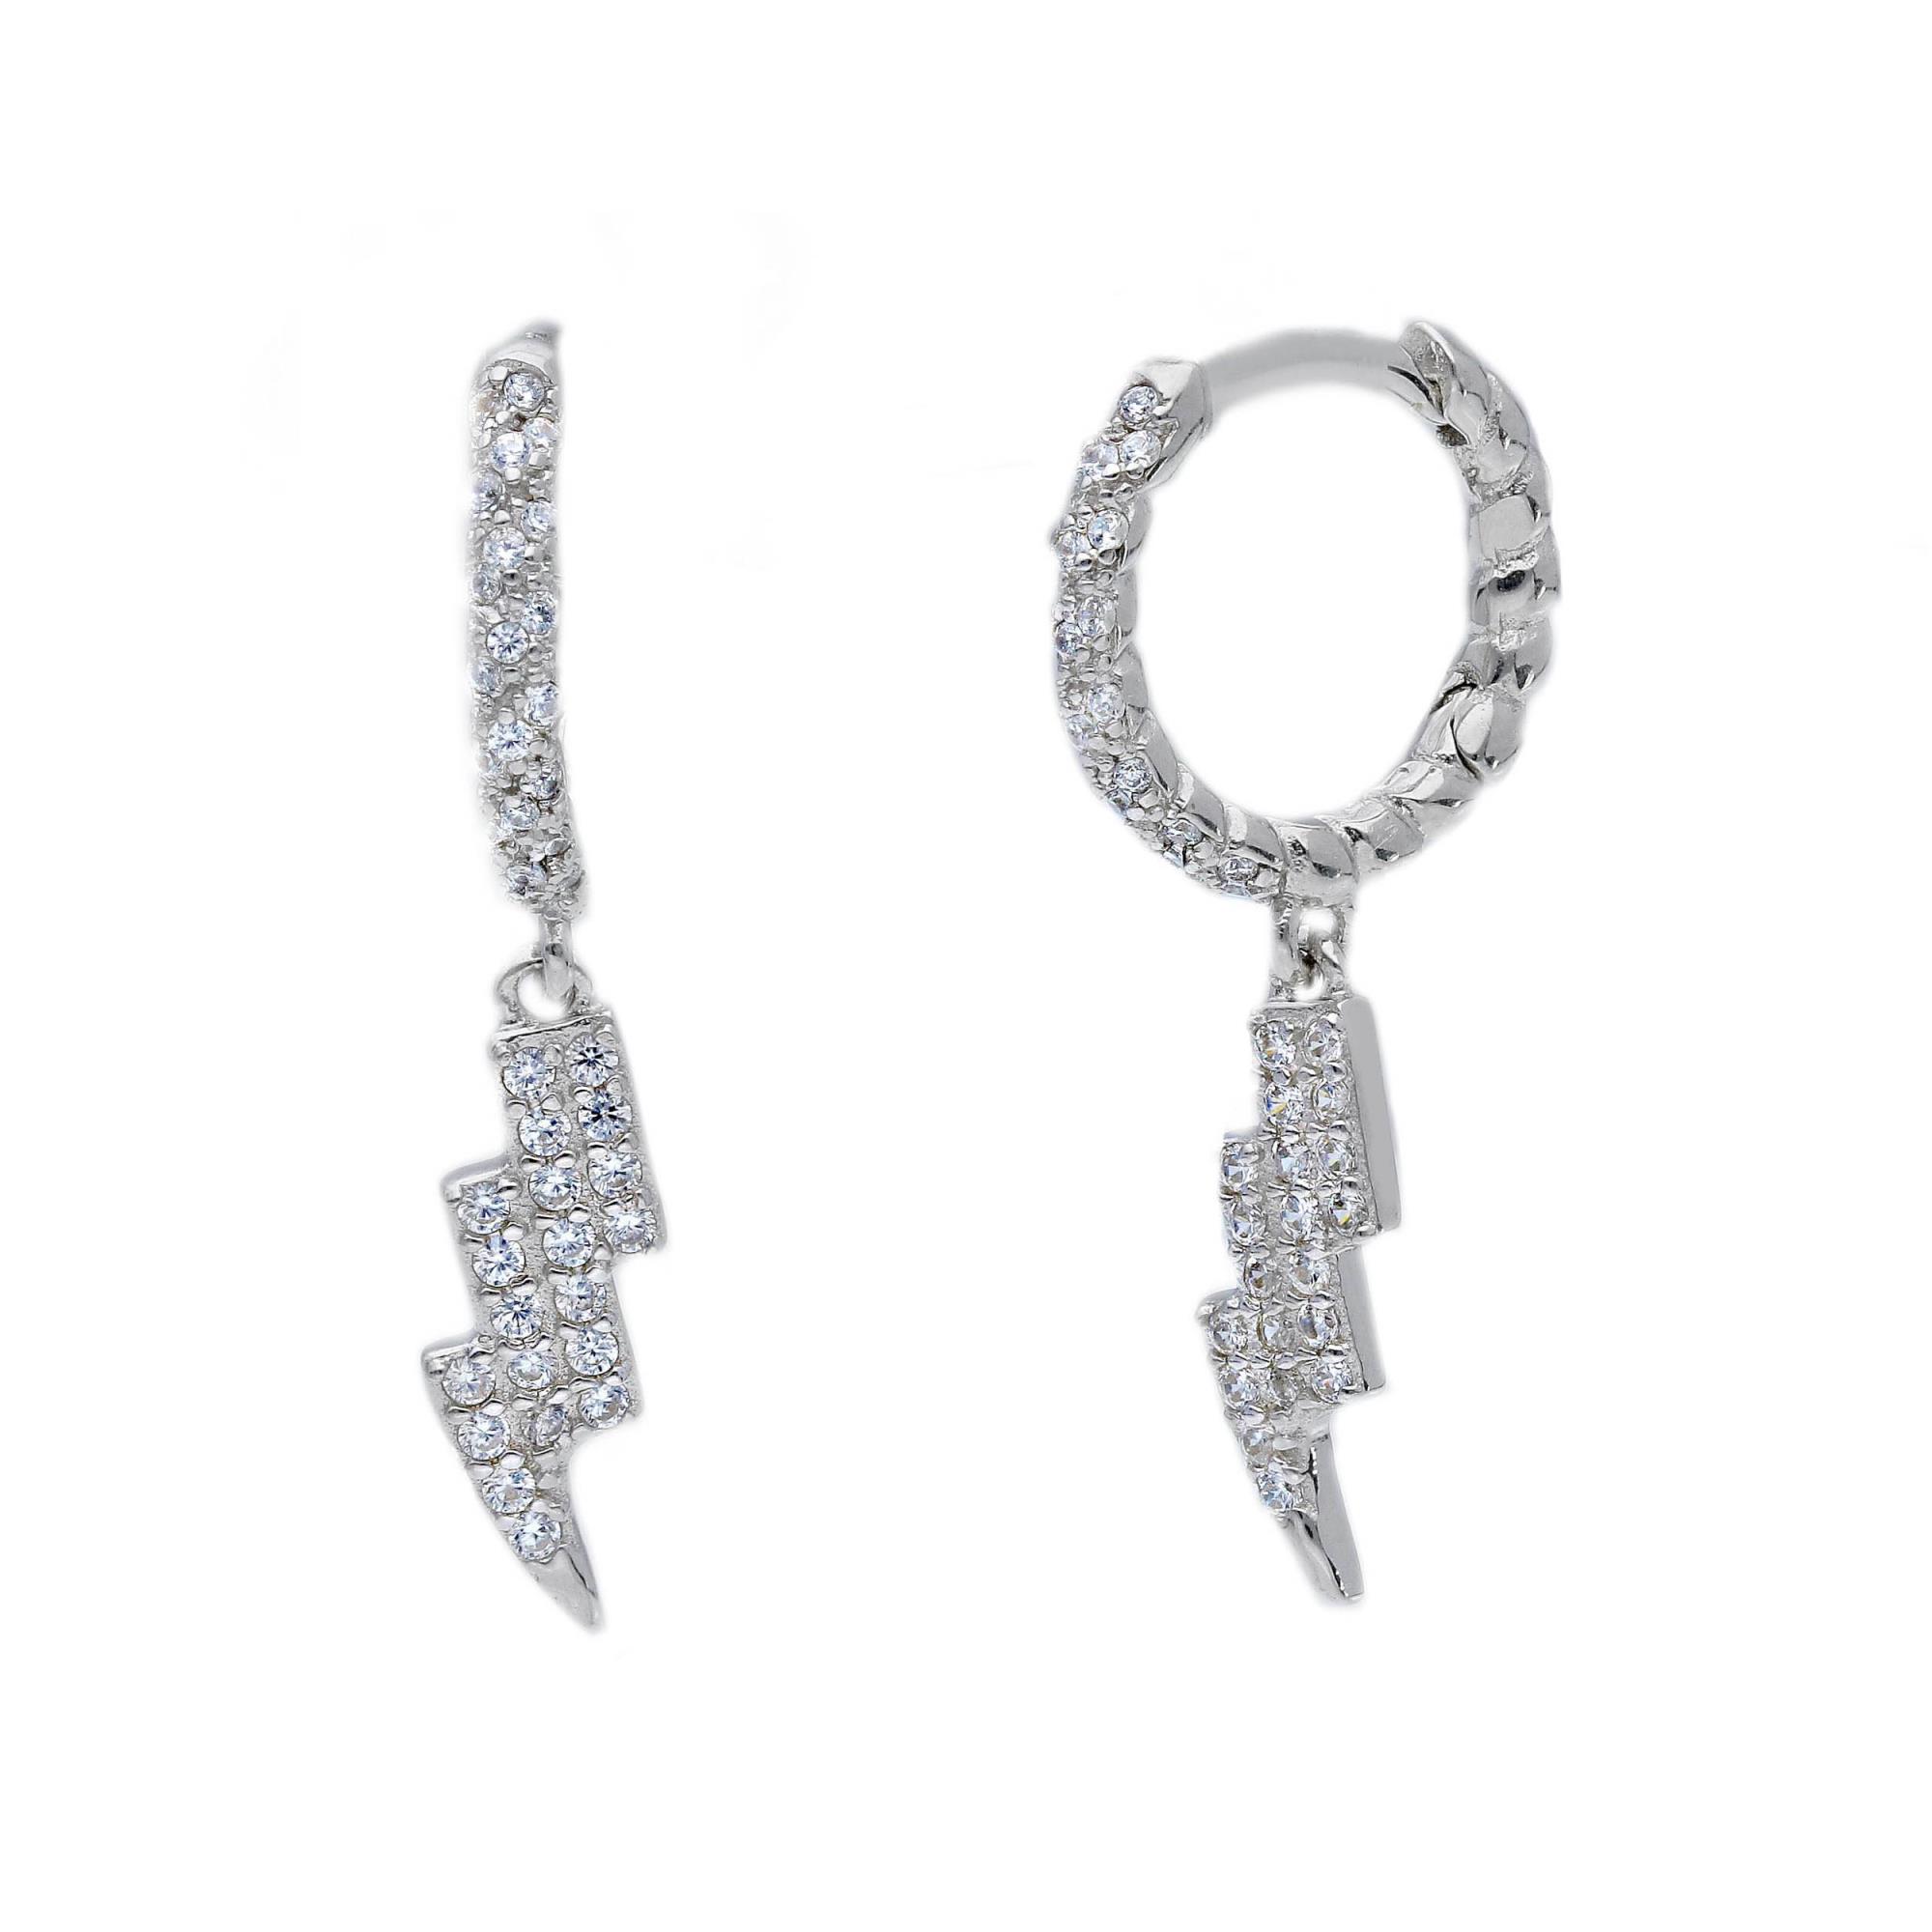 Silver pendant earrings with white zircons - ORO&CO 925